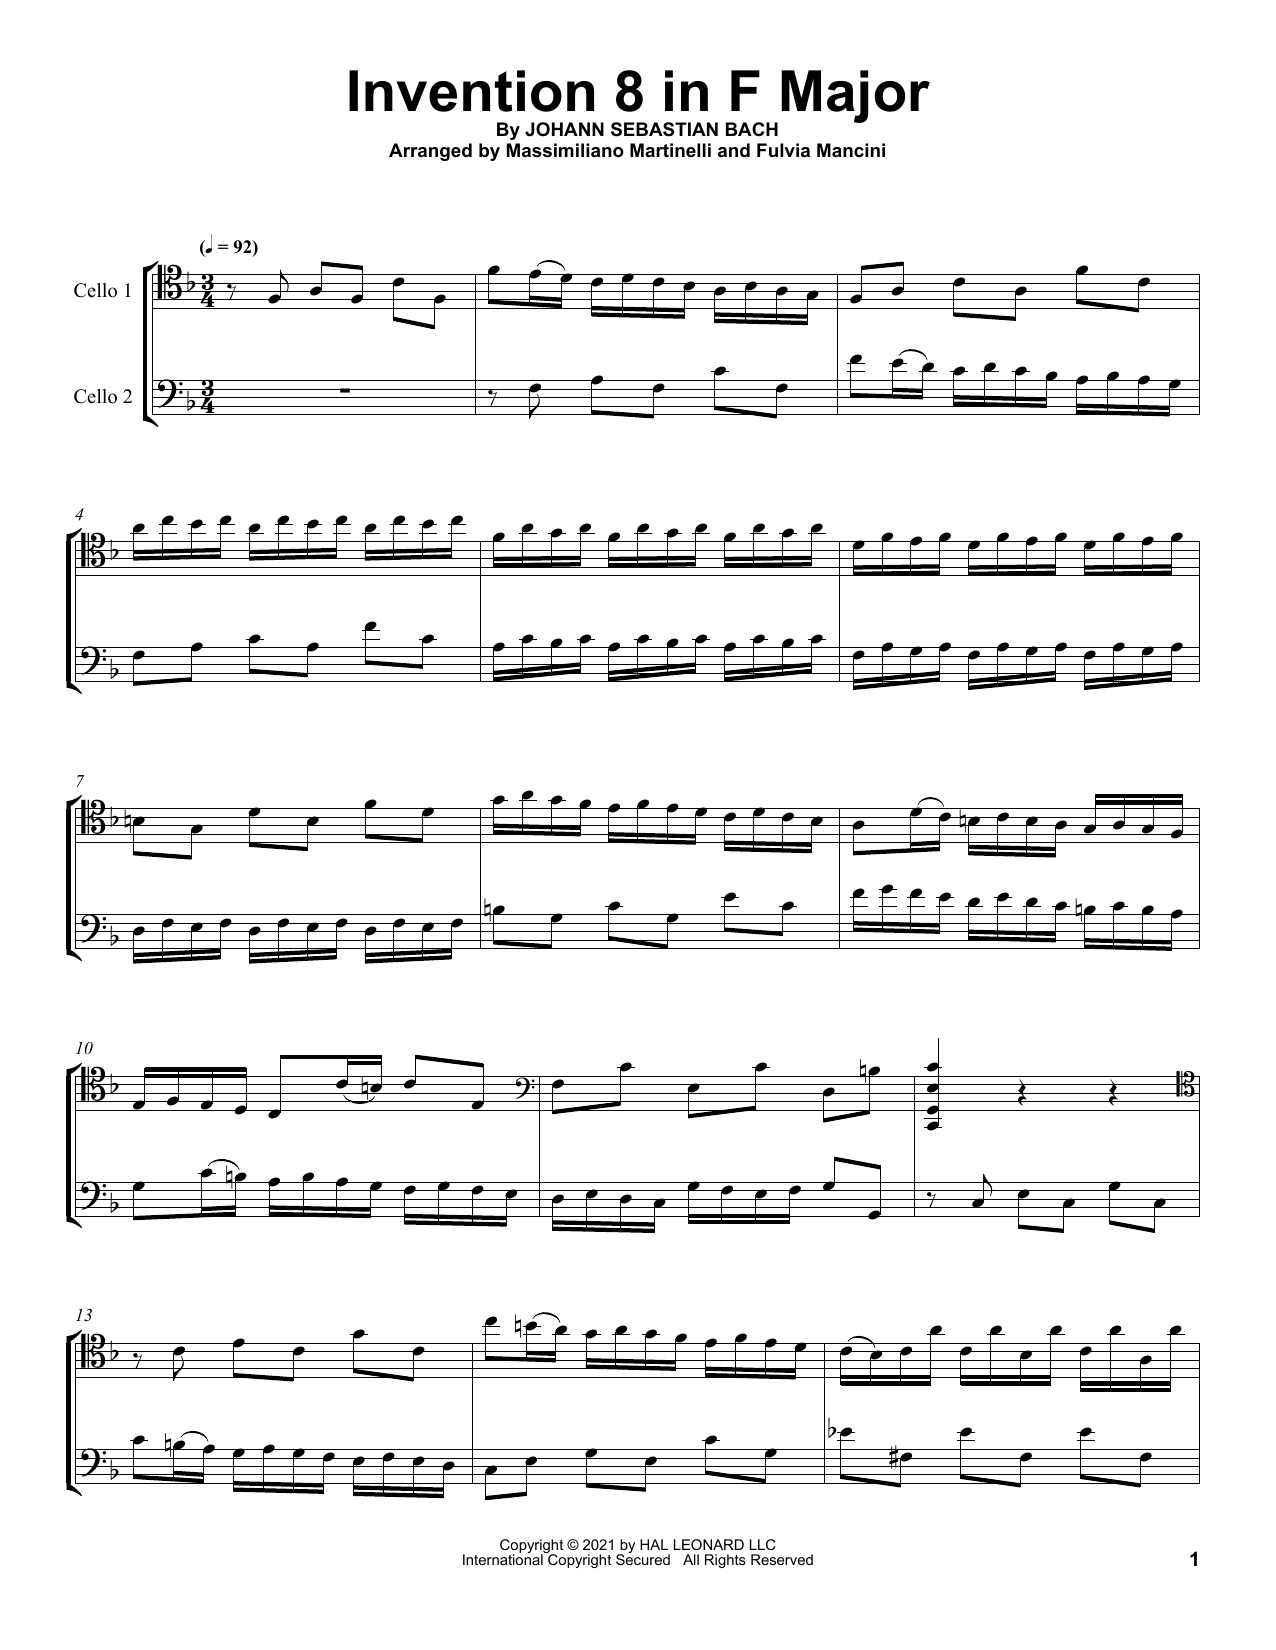 Download Mr & Mrs Cello Invention 8 In F Major Sheet Music